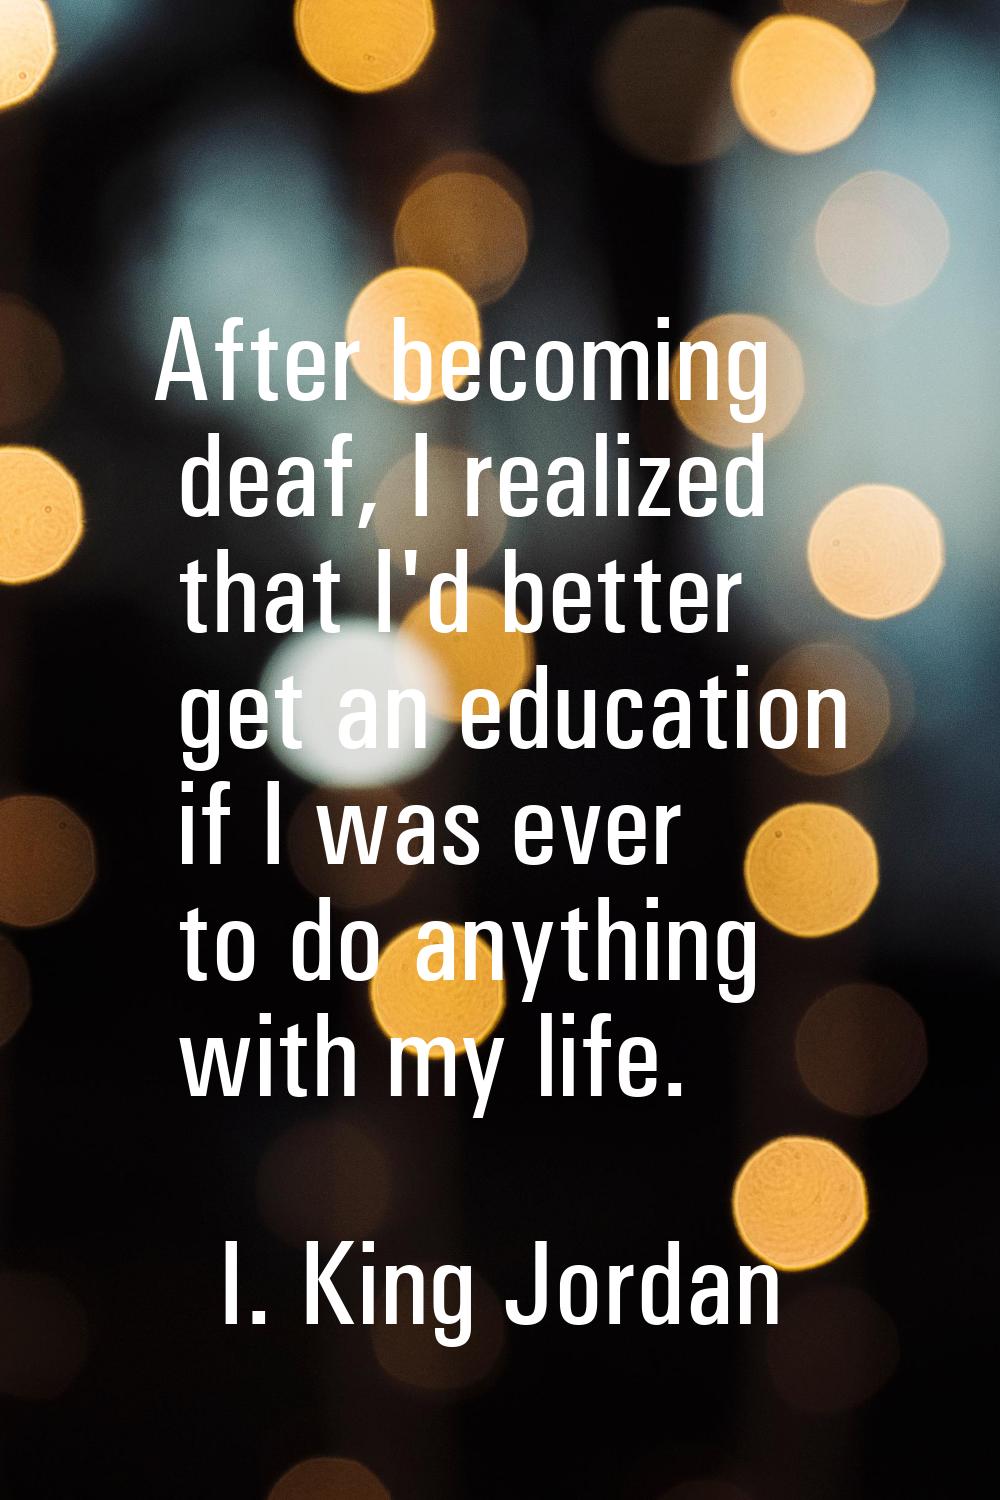 After becoming deaf, I realized that I'd better get an education if I was ever to do anything with 